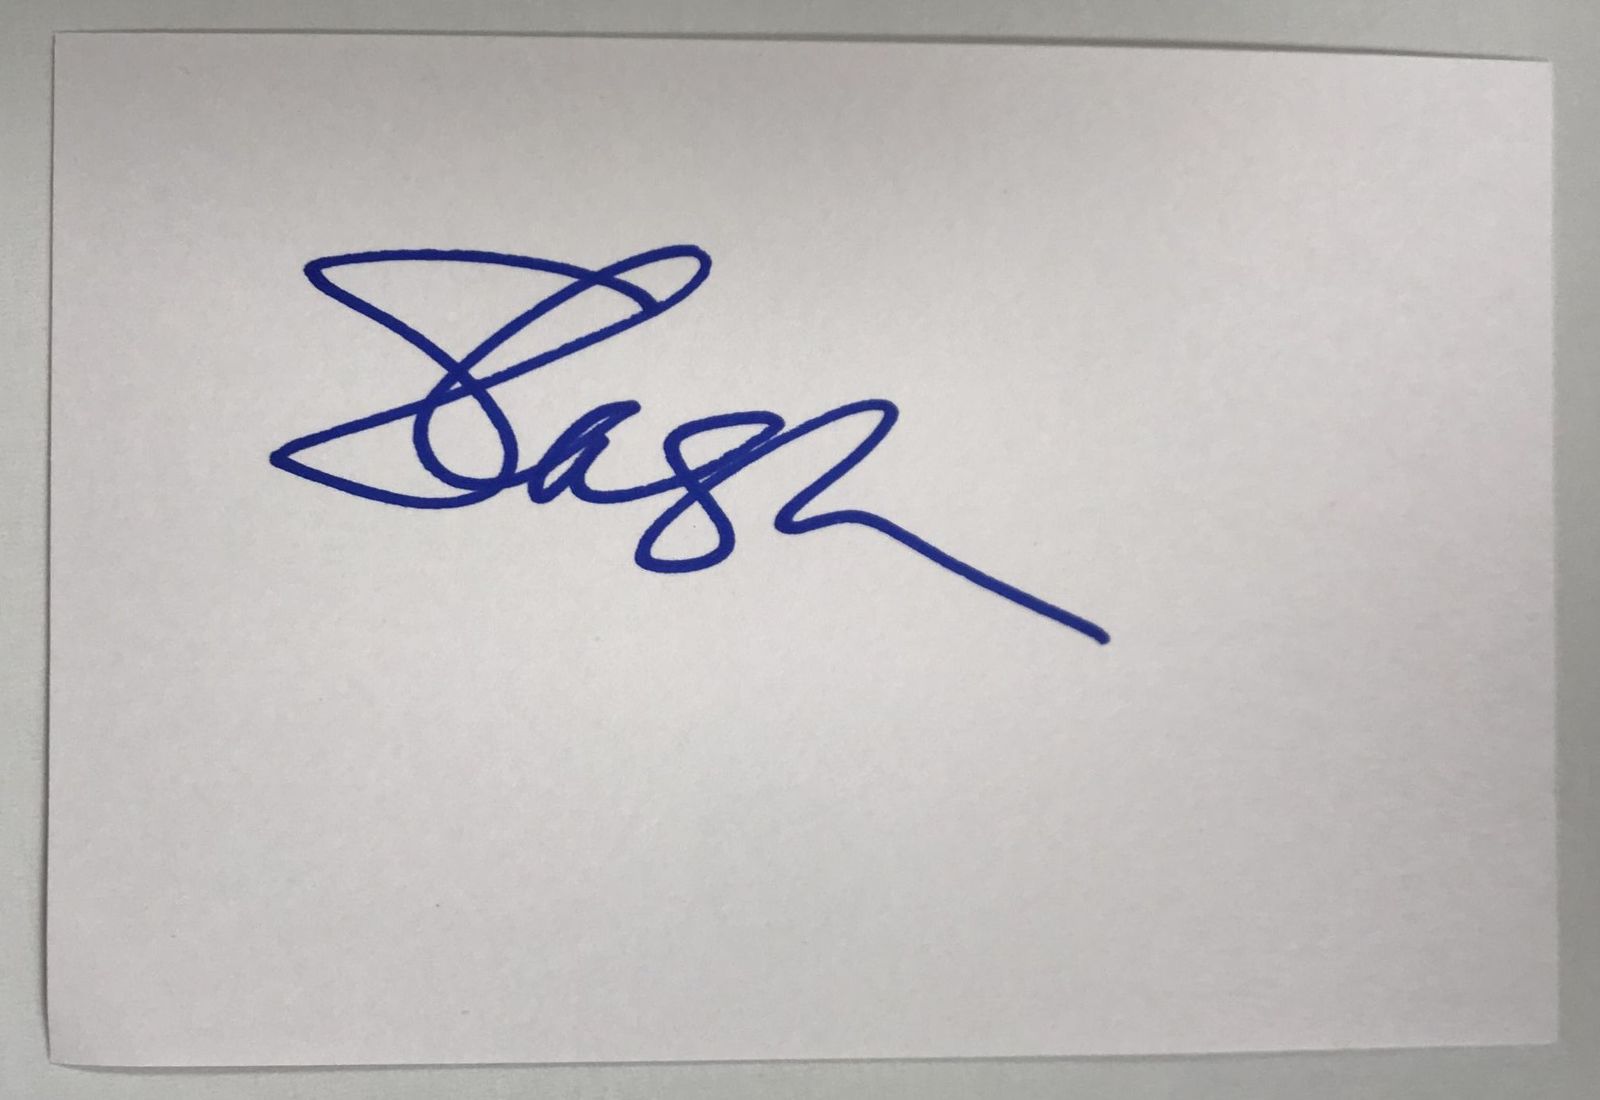 Primary image for Slash Signed Autographed 4x6 Index Card